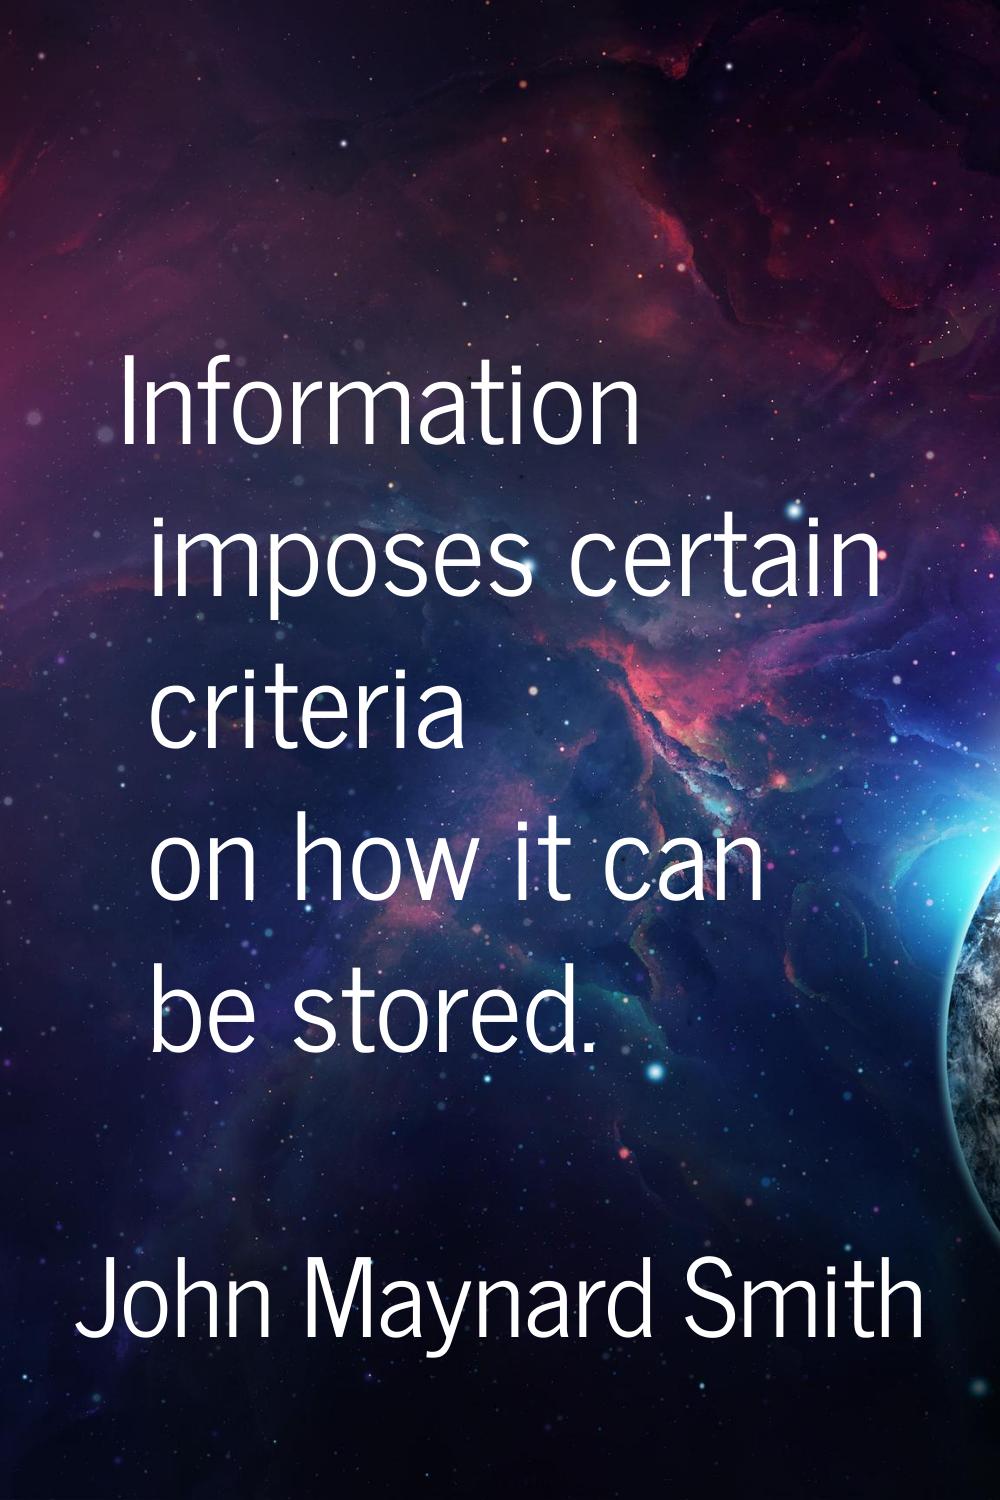 Information imposes certain criteria on how it can be stored.